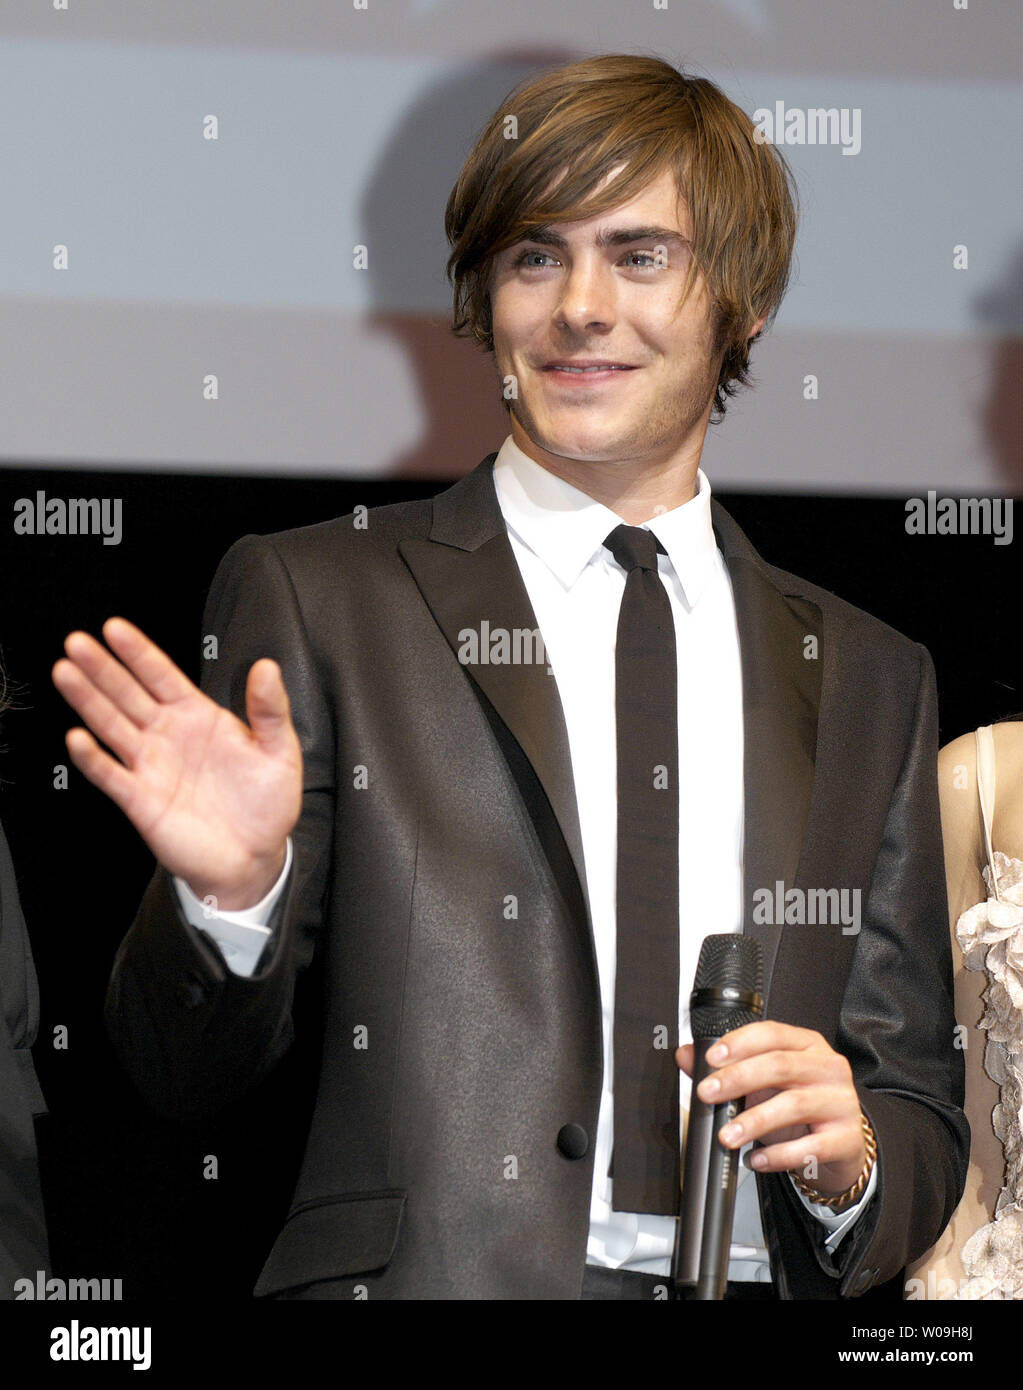 Actor Zac Efron attends the premiere of the film 'High School Musical' in Tokyo, Japan, on January 28, 2009. (UPI Photo/Keizo Mori) Stock Photo